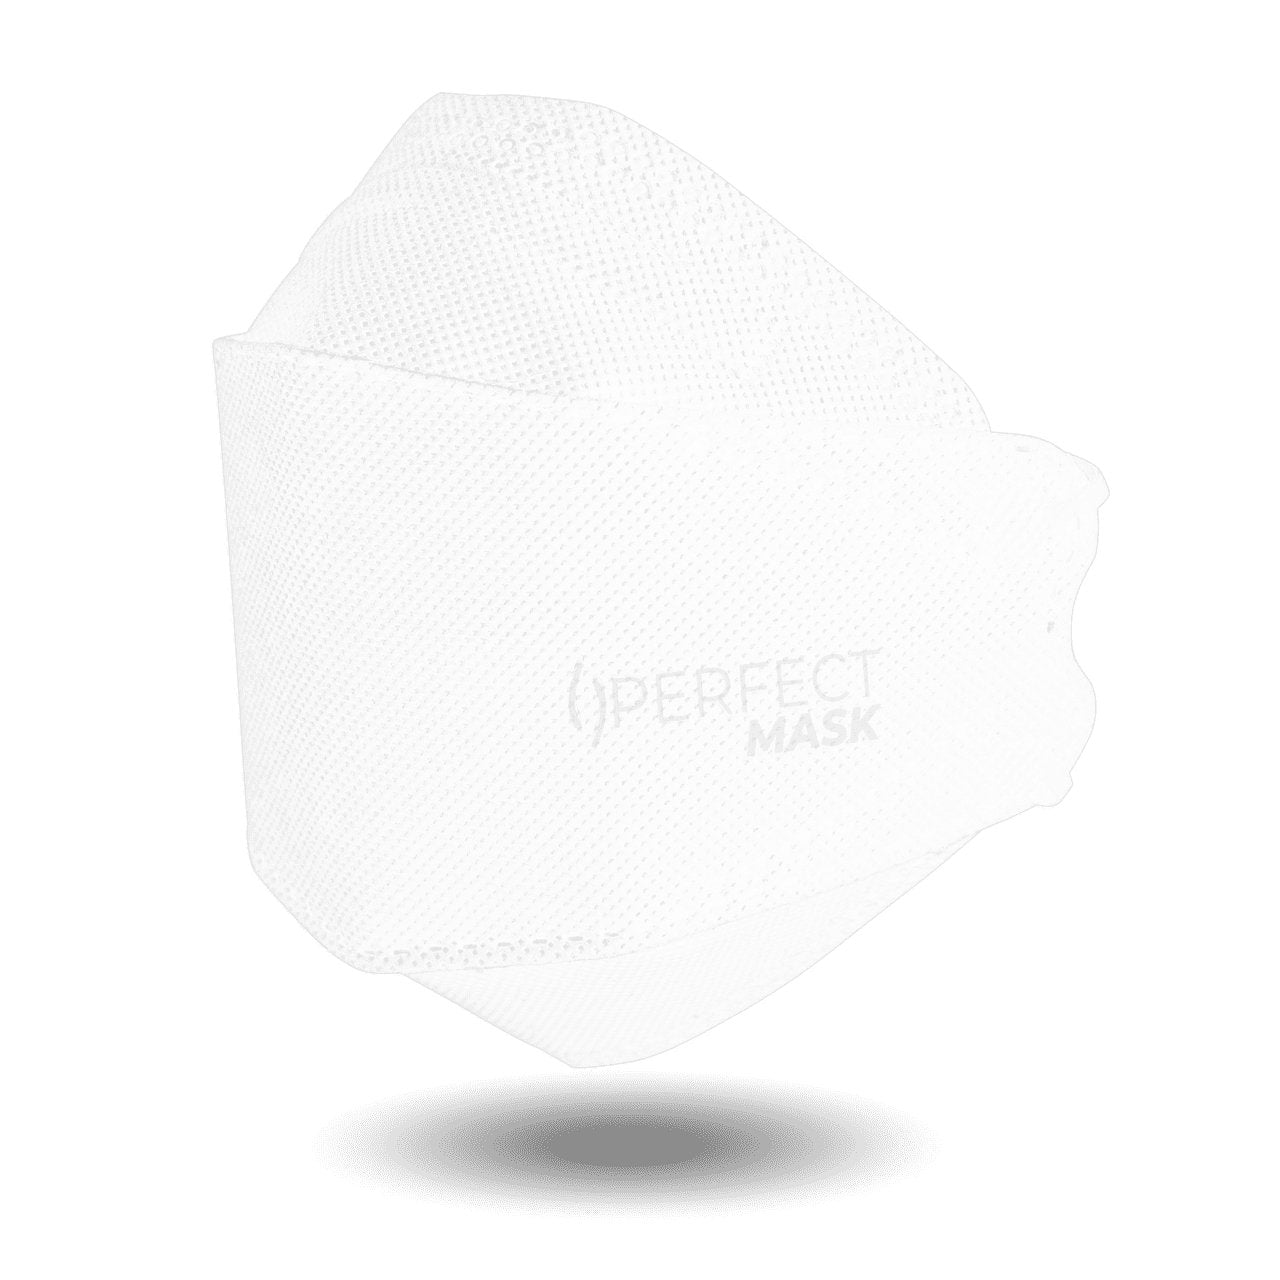 Perfect Mask: High Performance Face Mask (5 Pack) - Defender Safety